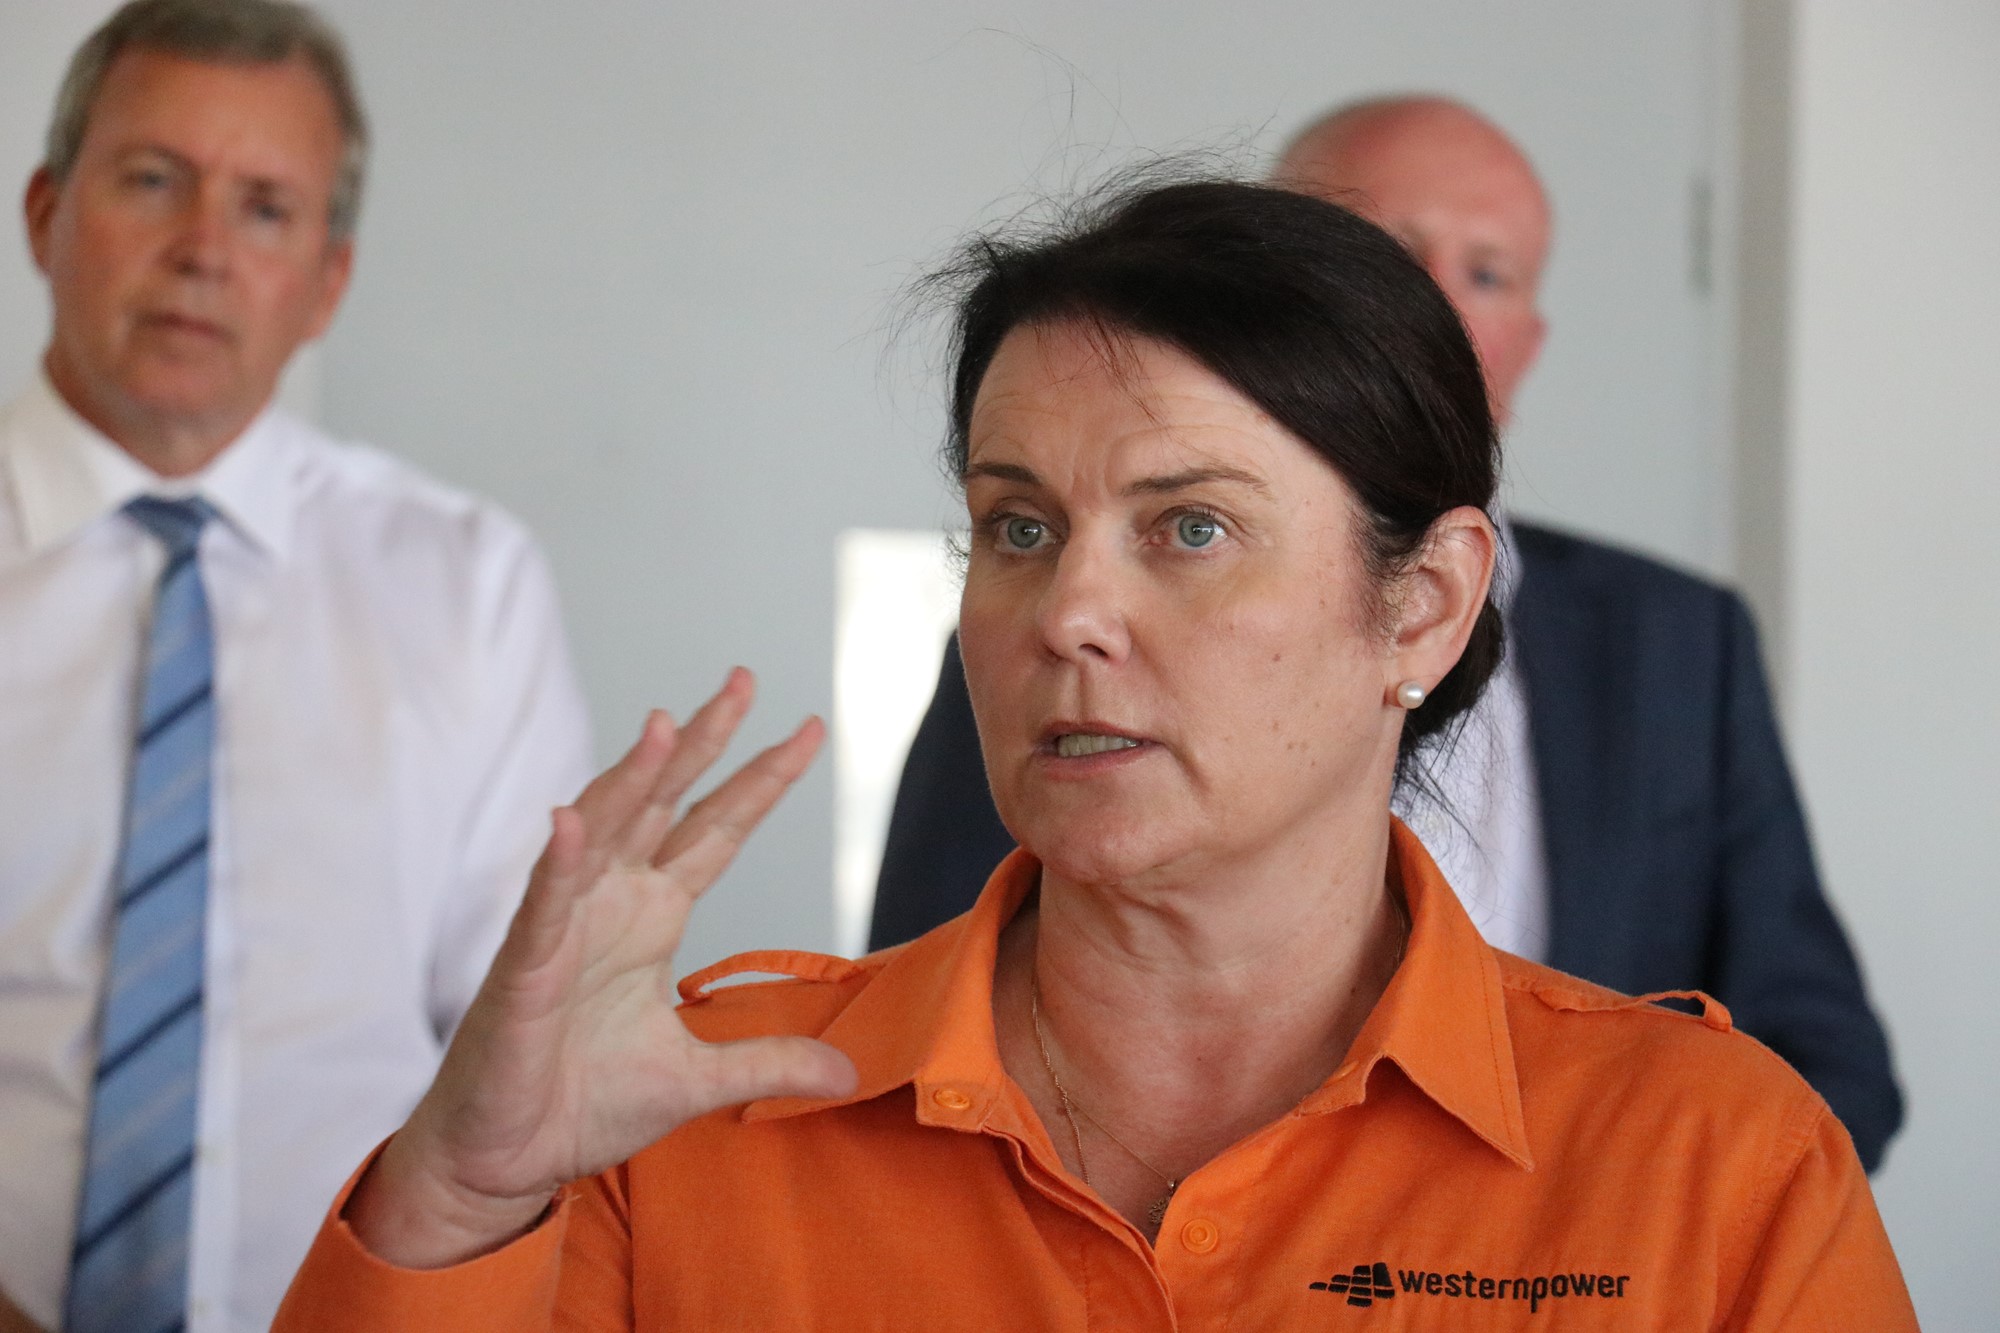 A woman in an orange shirt speaks at a press conference